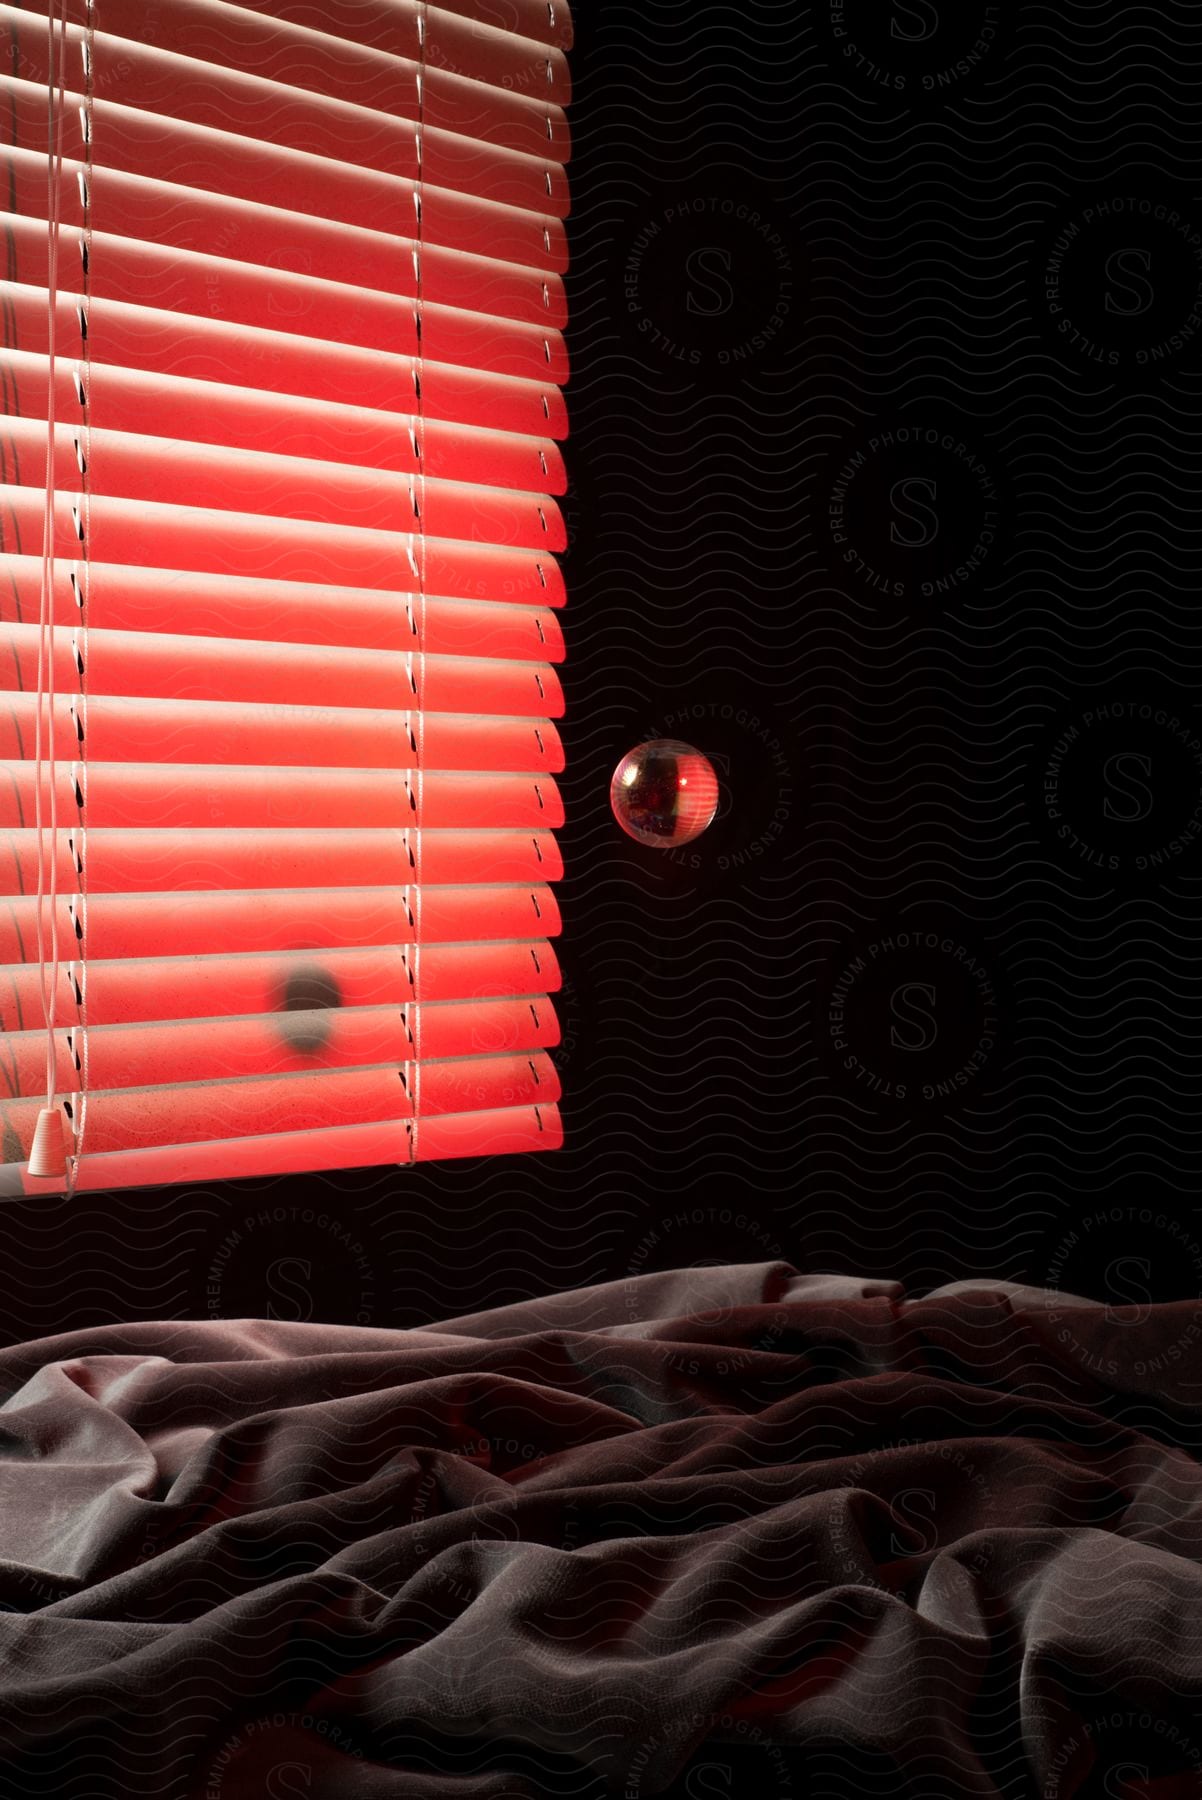 White blinds covering a window with red light shining through and messy bed sheets